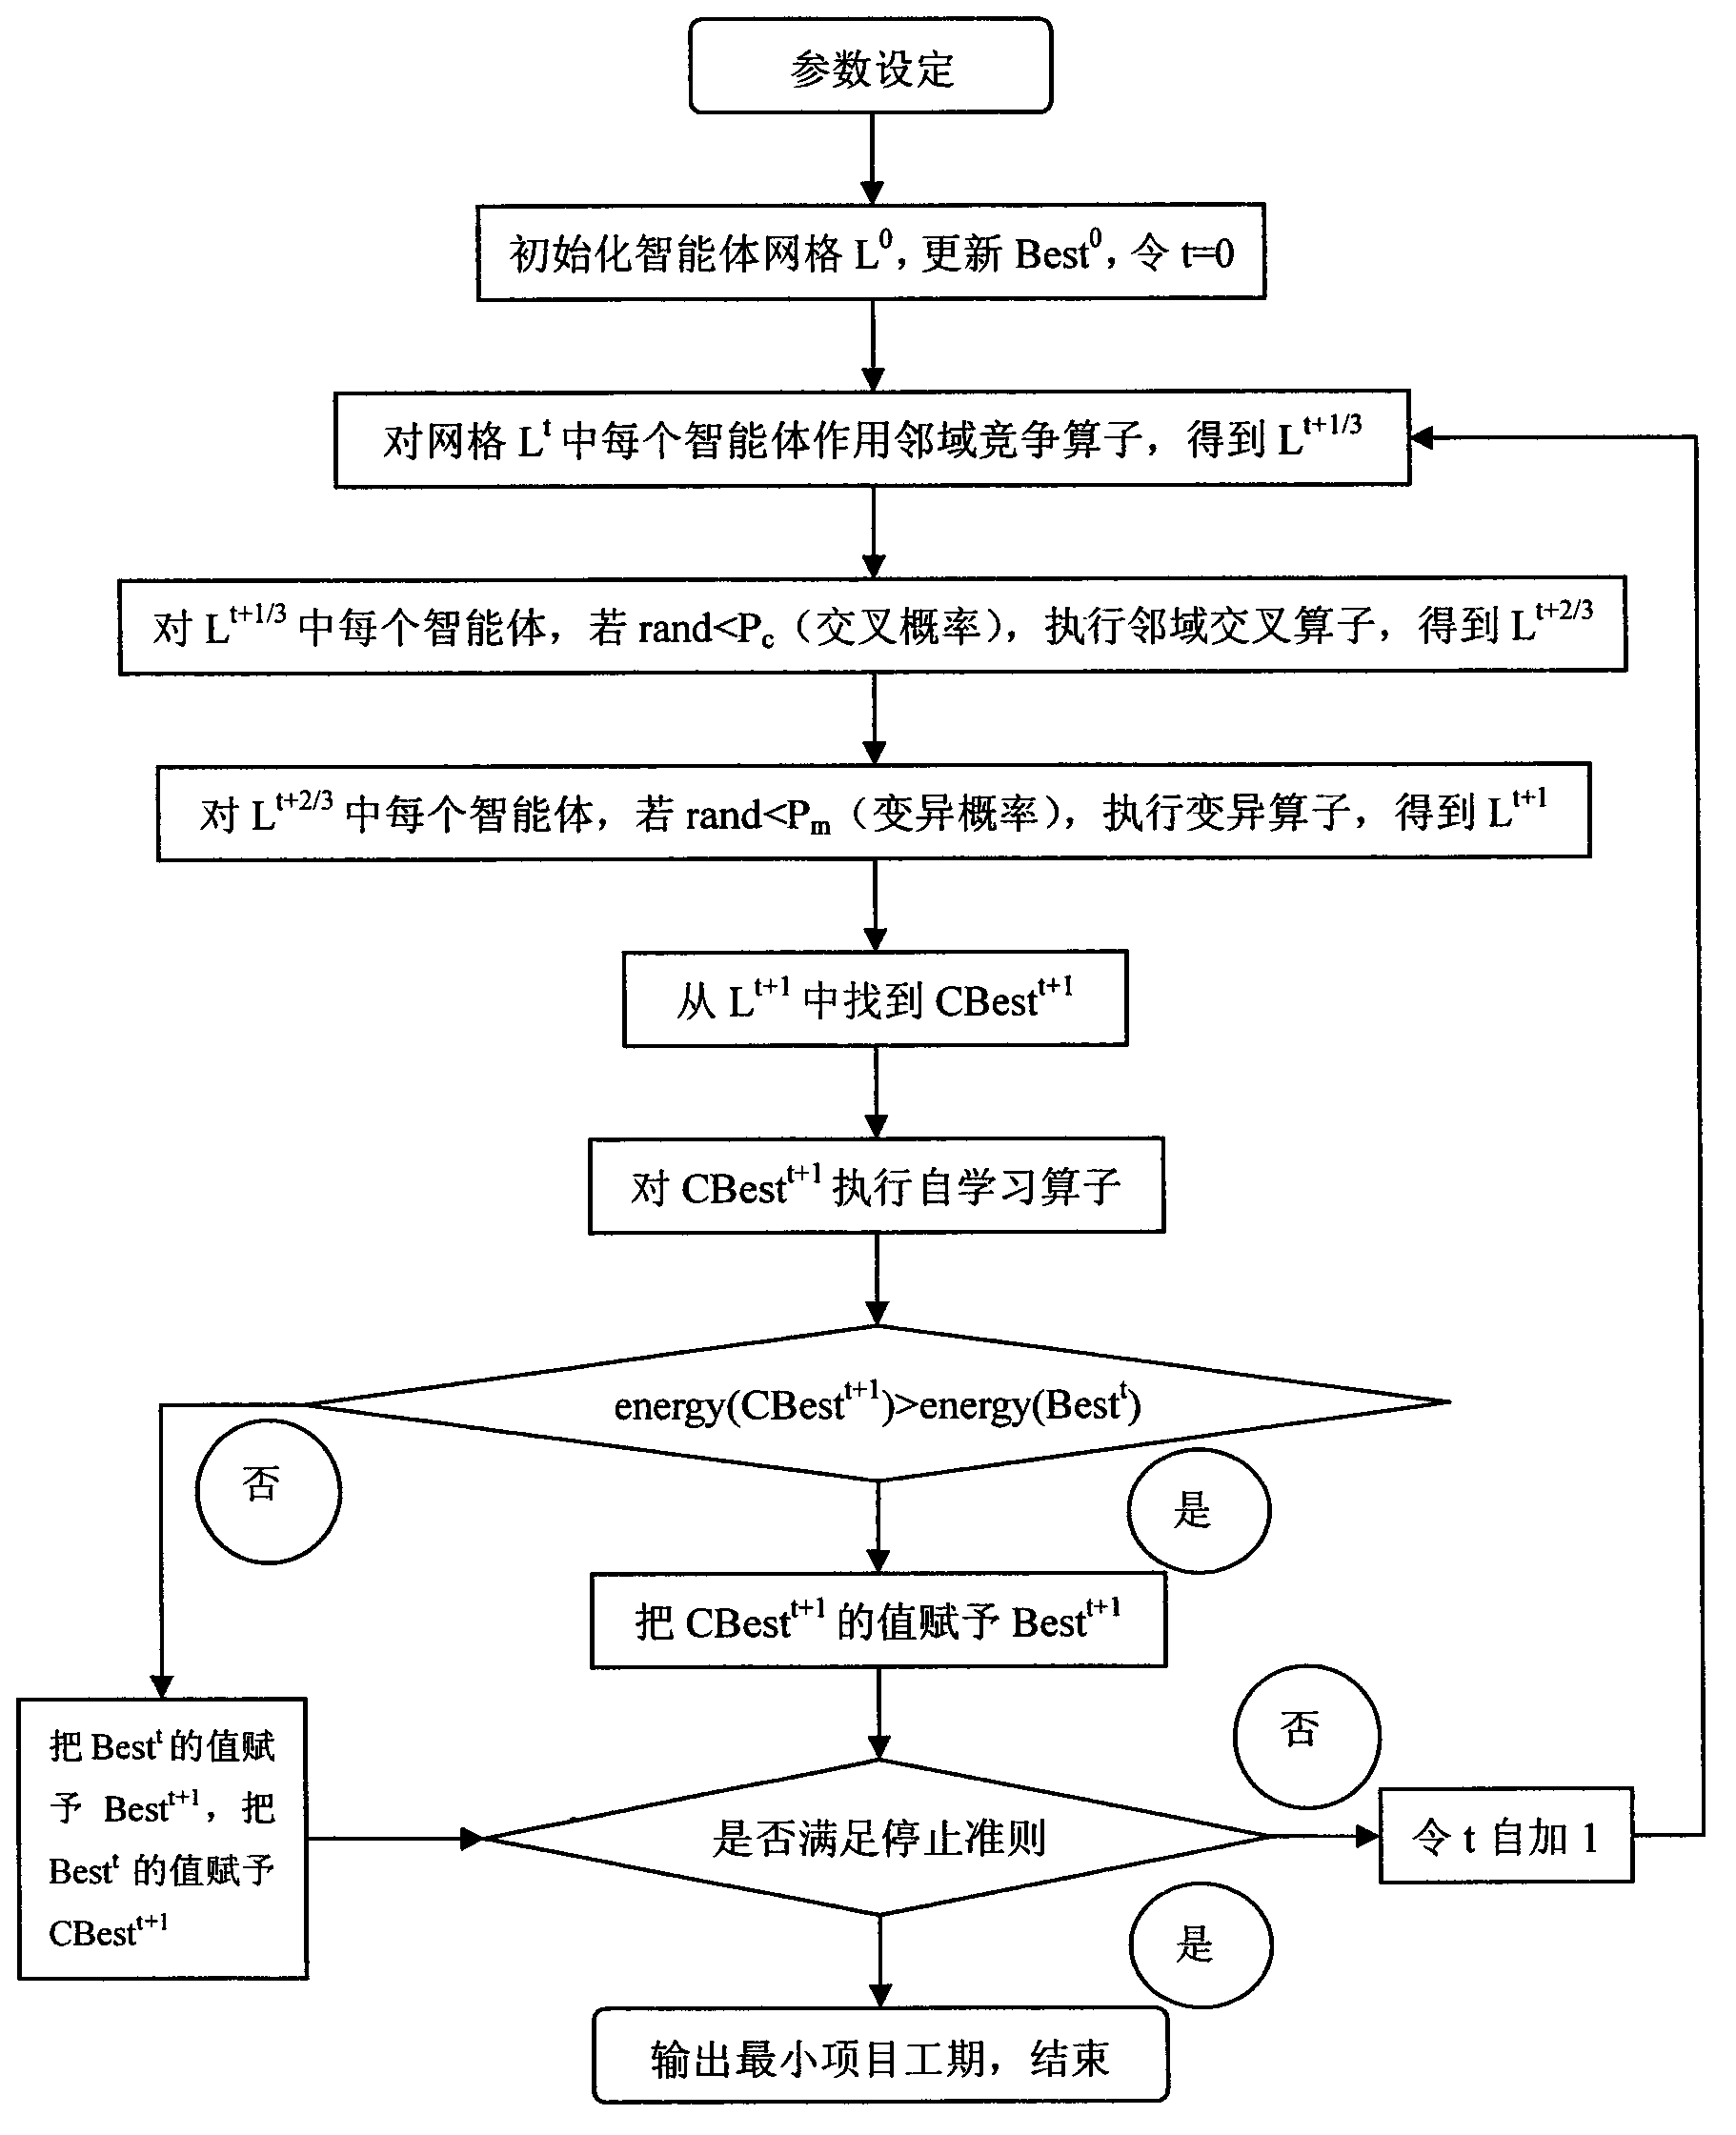 Resource-constrained project scheduling method based on multi-agent evolutionary algorithm